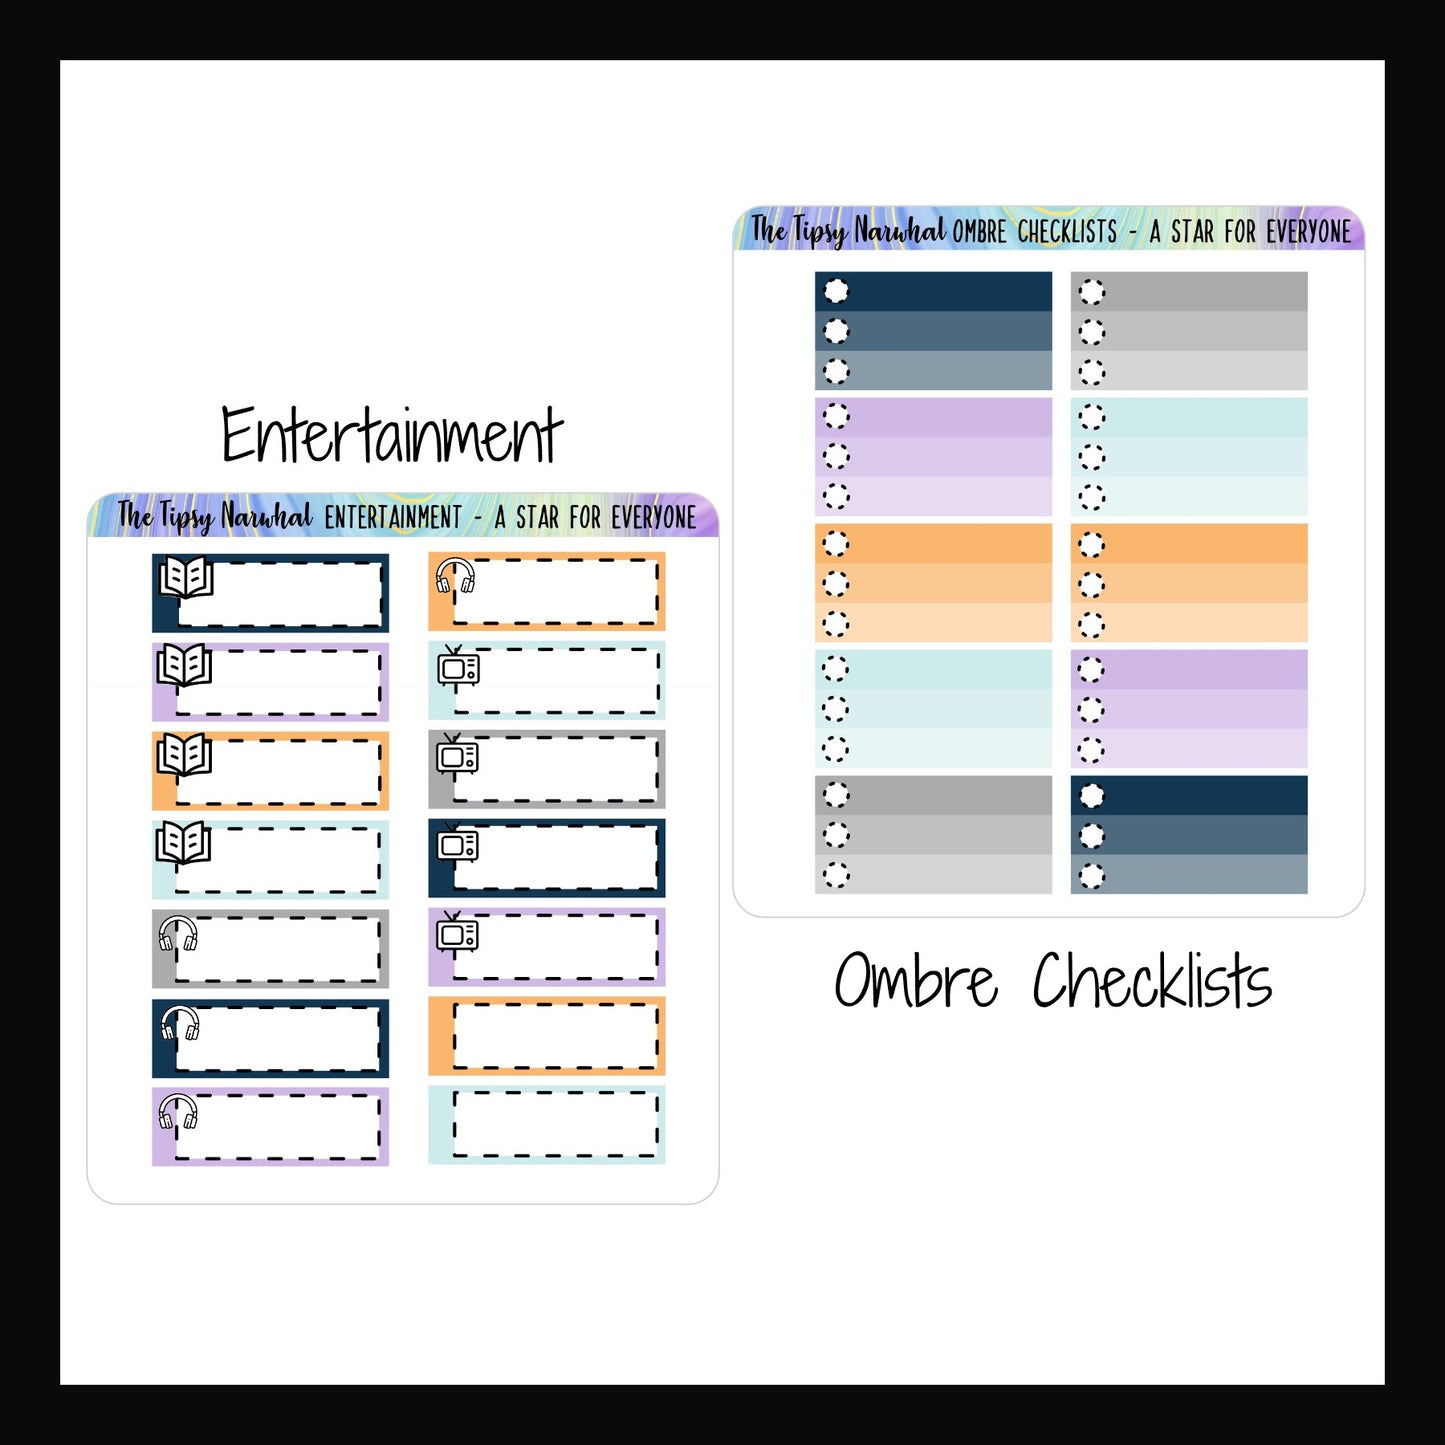 Digital A Star For Everyone Functional Add-ons sheets. Entertainment sticker sheet and Ombre Checklists sticker sheet.